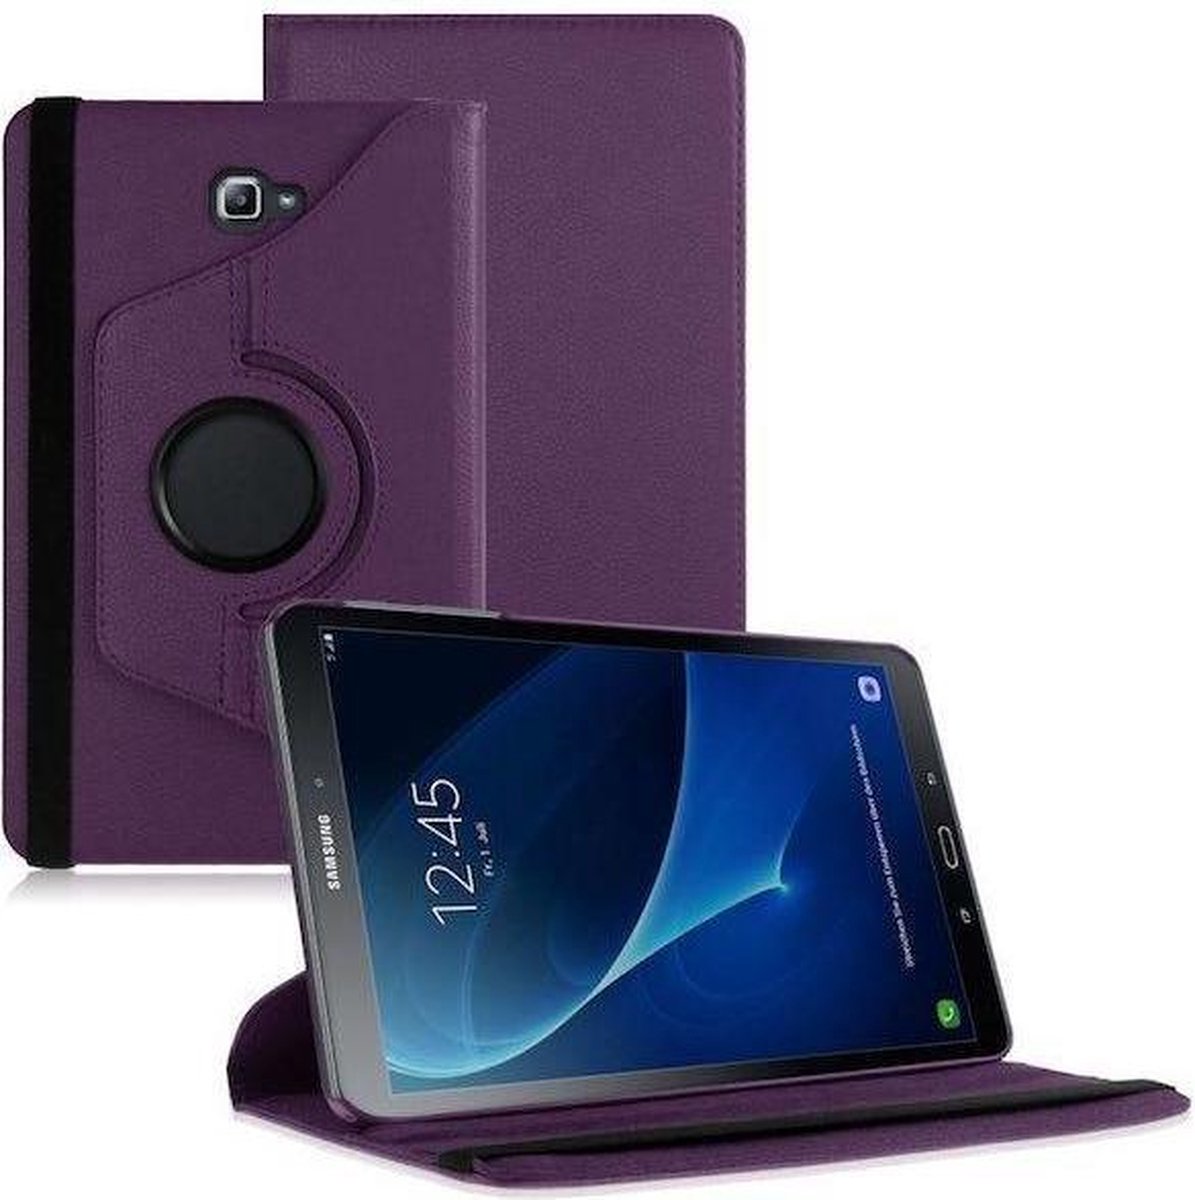 Case2go - Tablet hoes geschikt voor Samsung Galaxy Tab A 10.1 (2016/2018) draaibare cover hoes Paars - Case2go